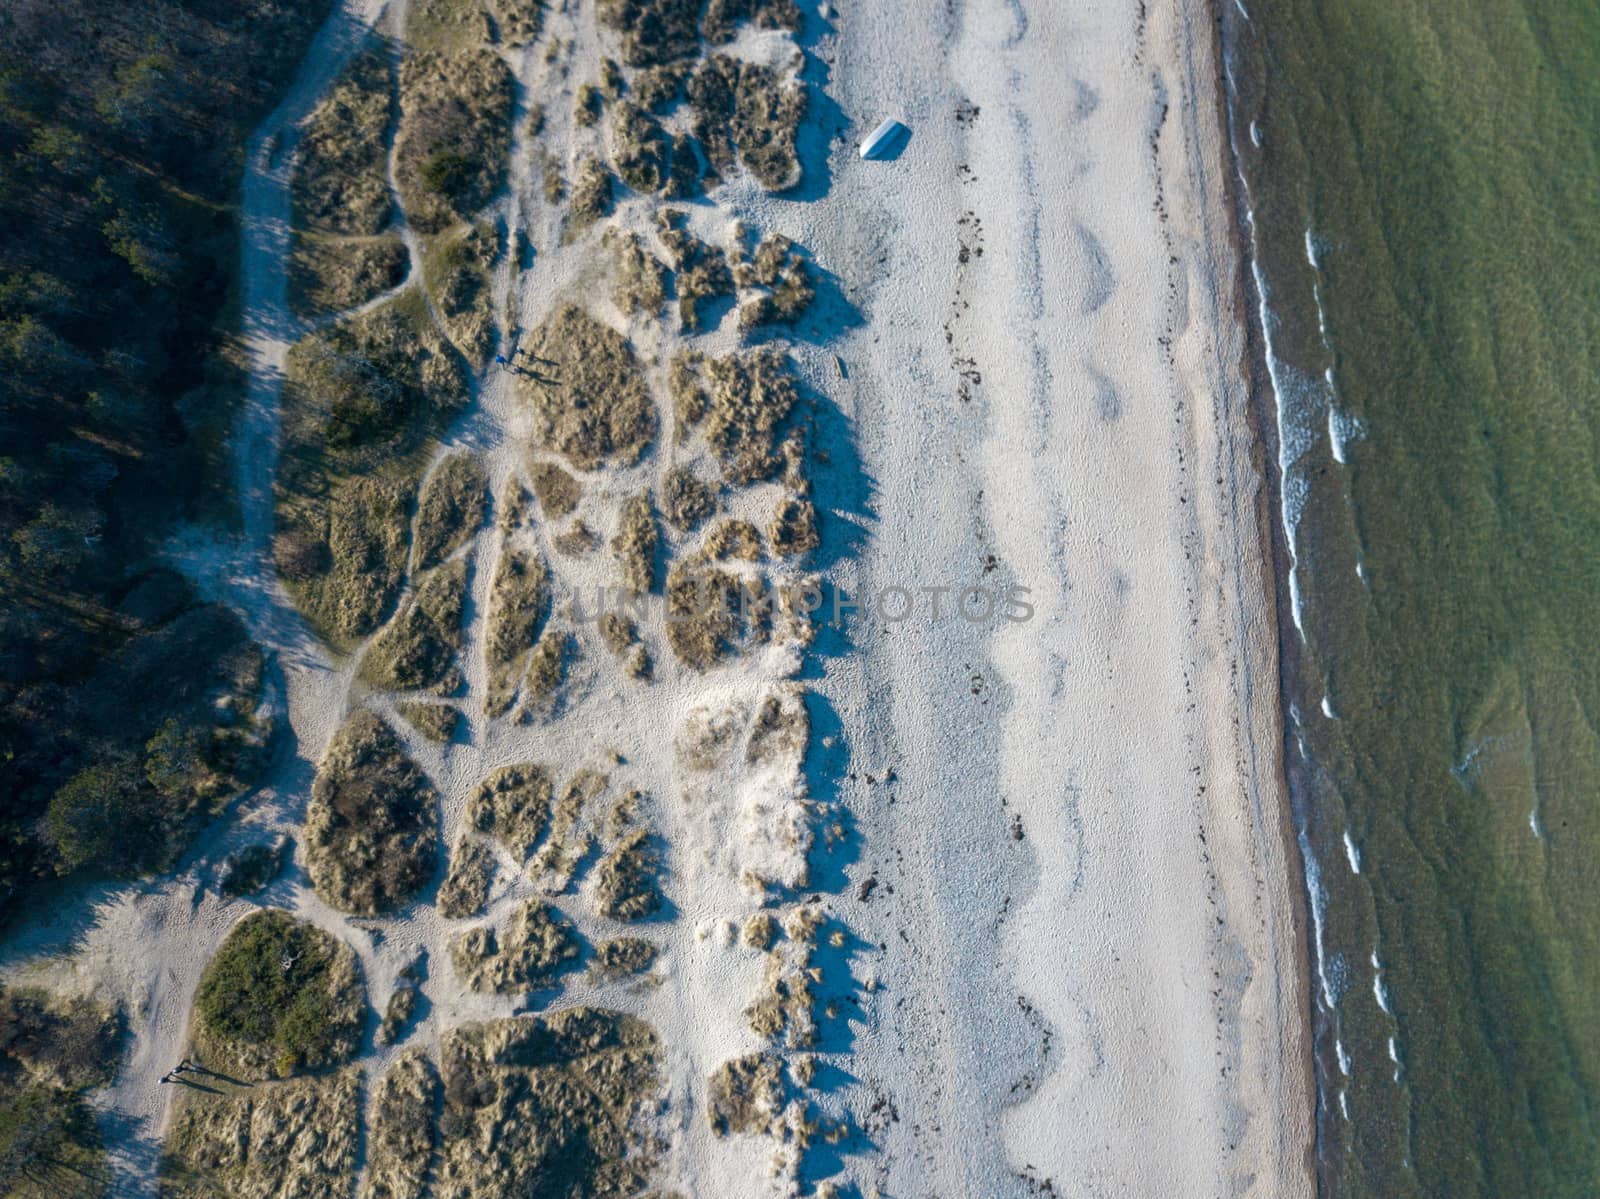 Tisvildeleje, Denmark - February 24, 2019: Aerial drone  view of the coastline beach, sand dunes and forest.